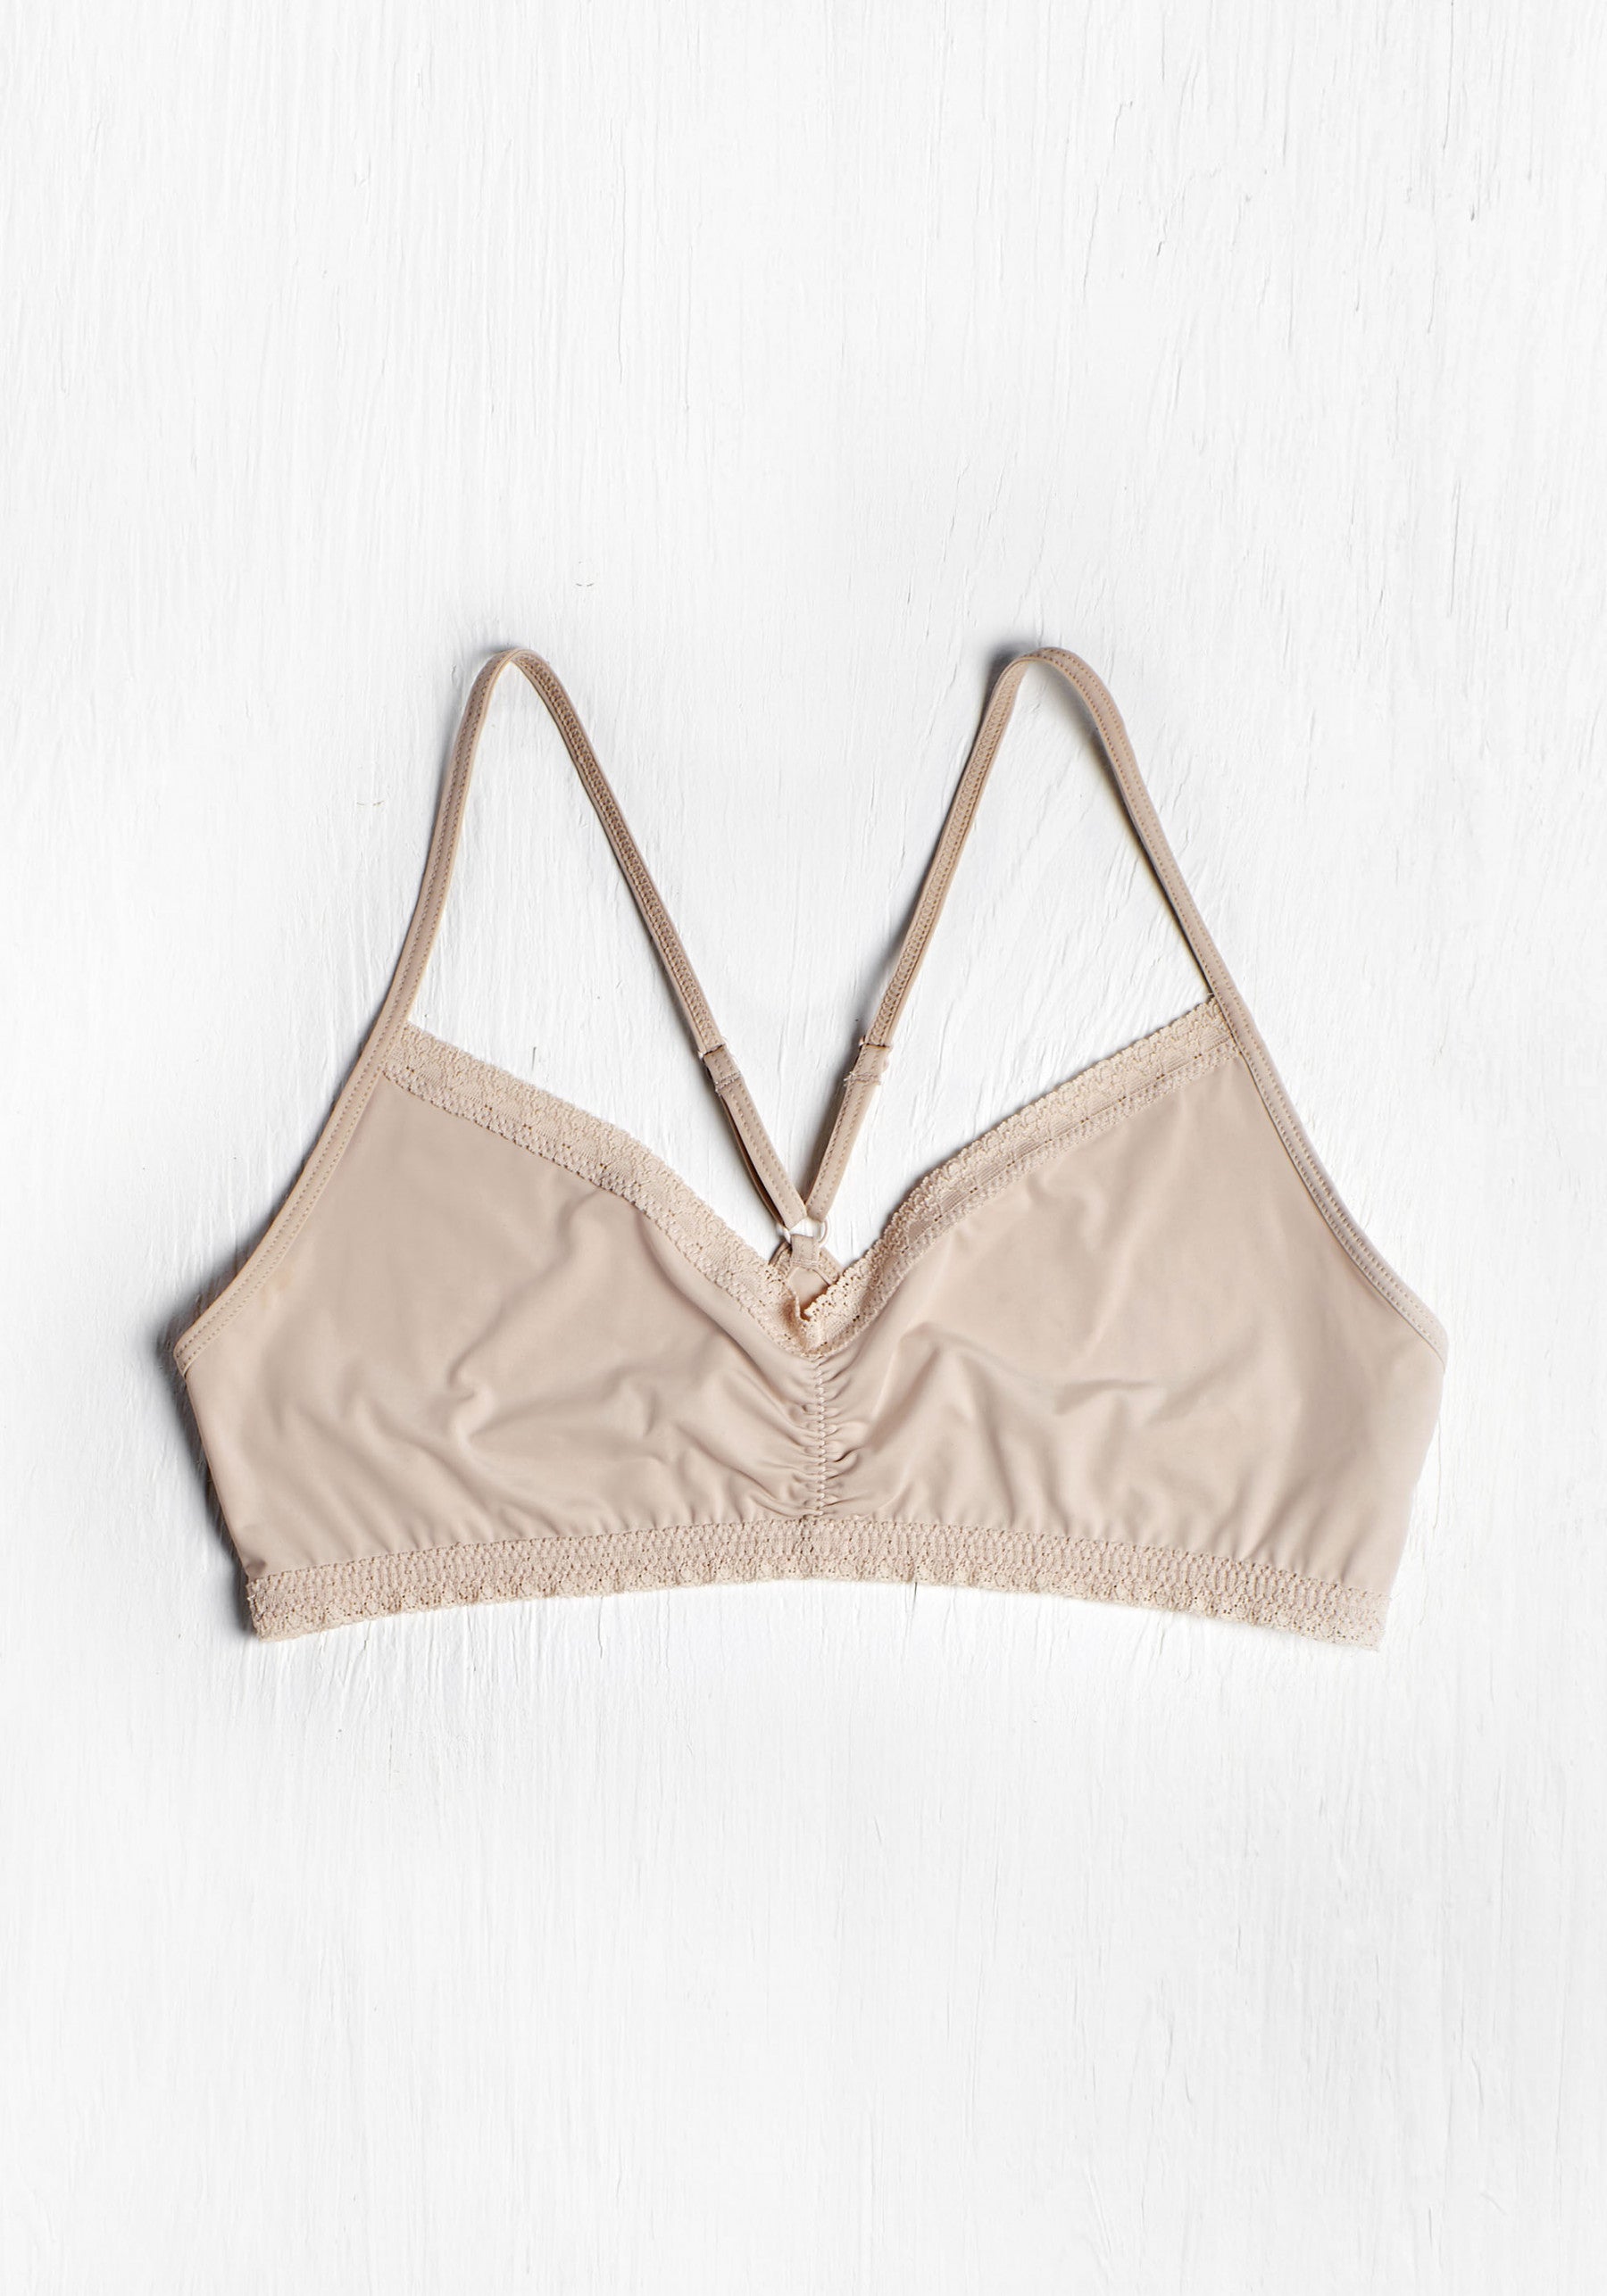 The Nude Micro Lace Trimmed Bralette